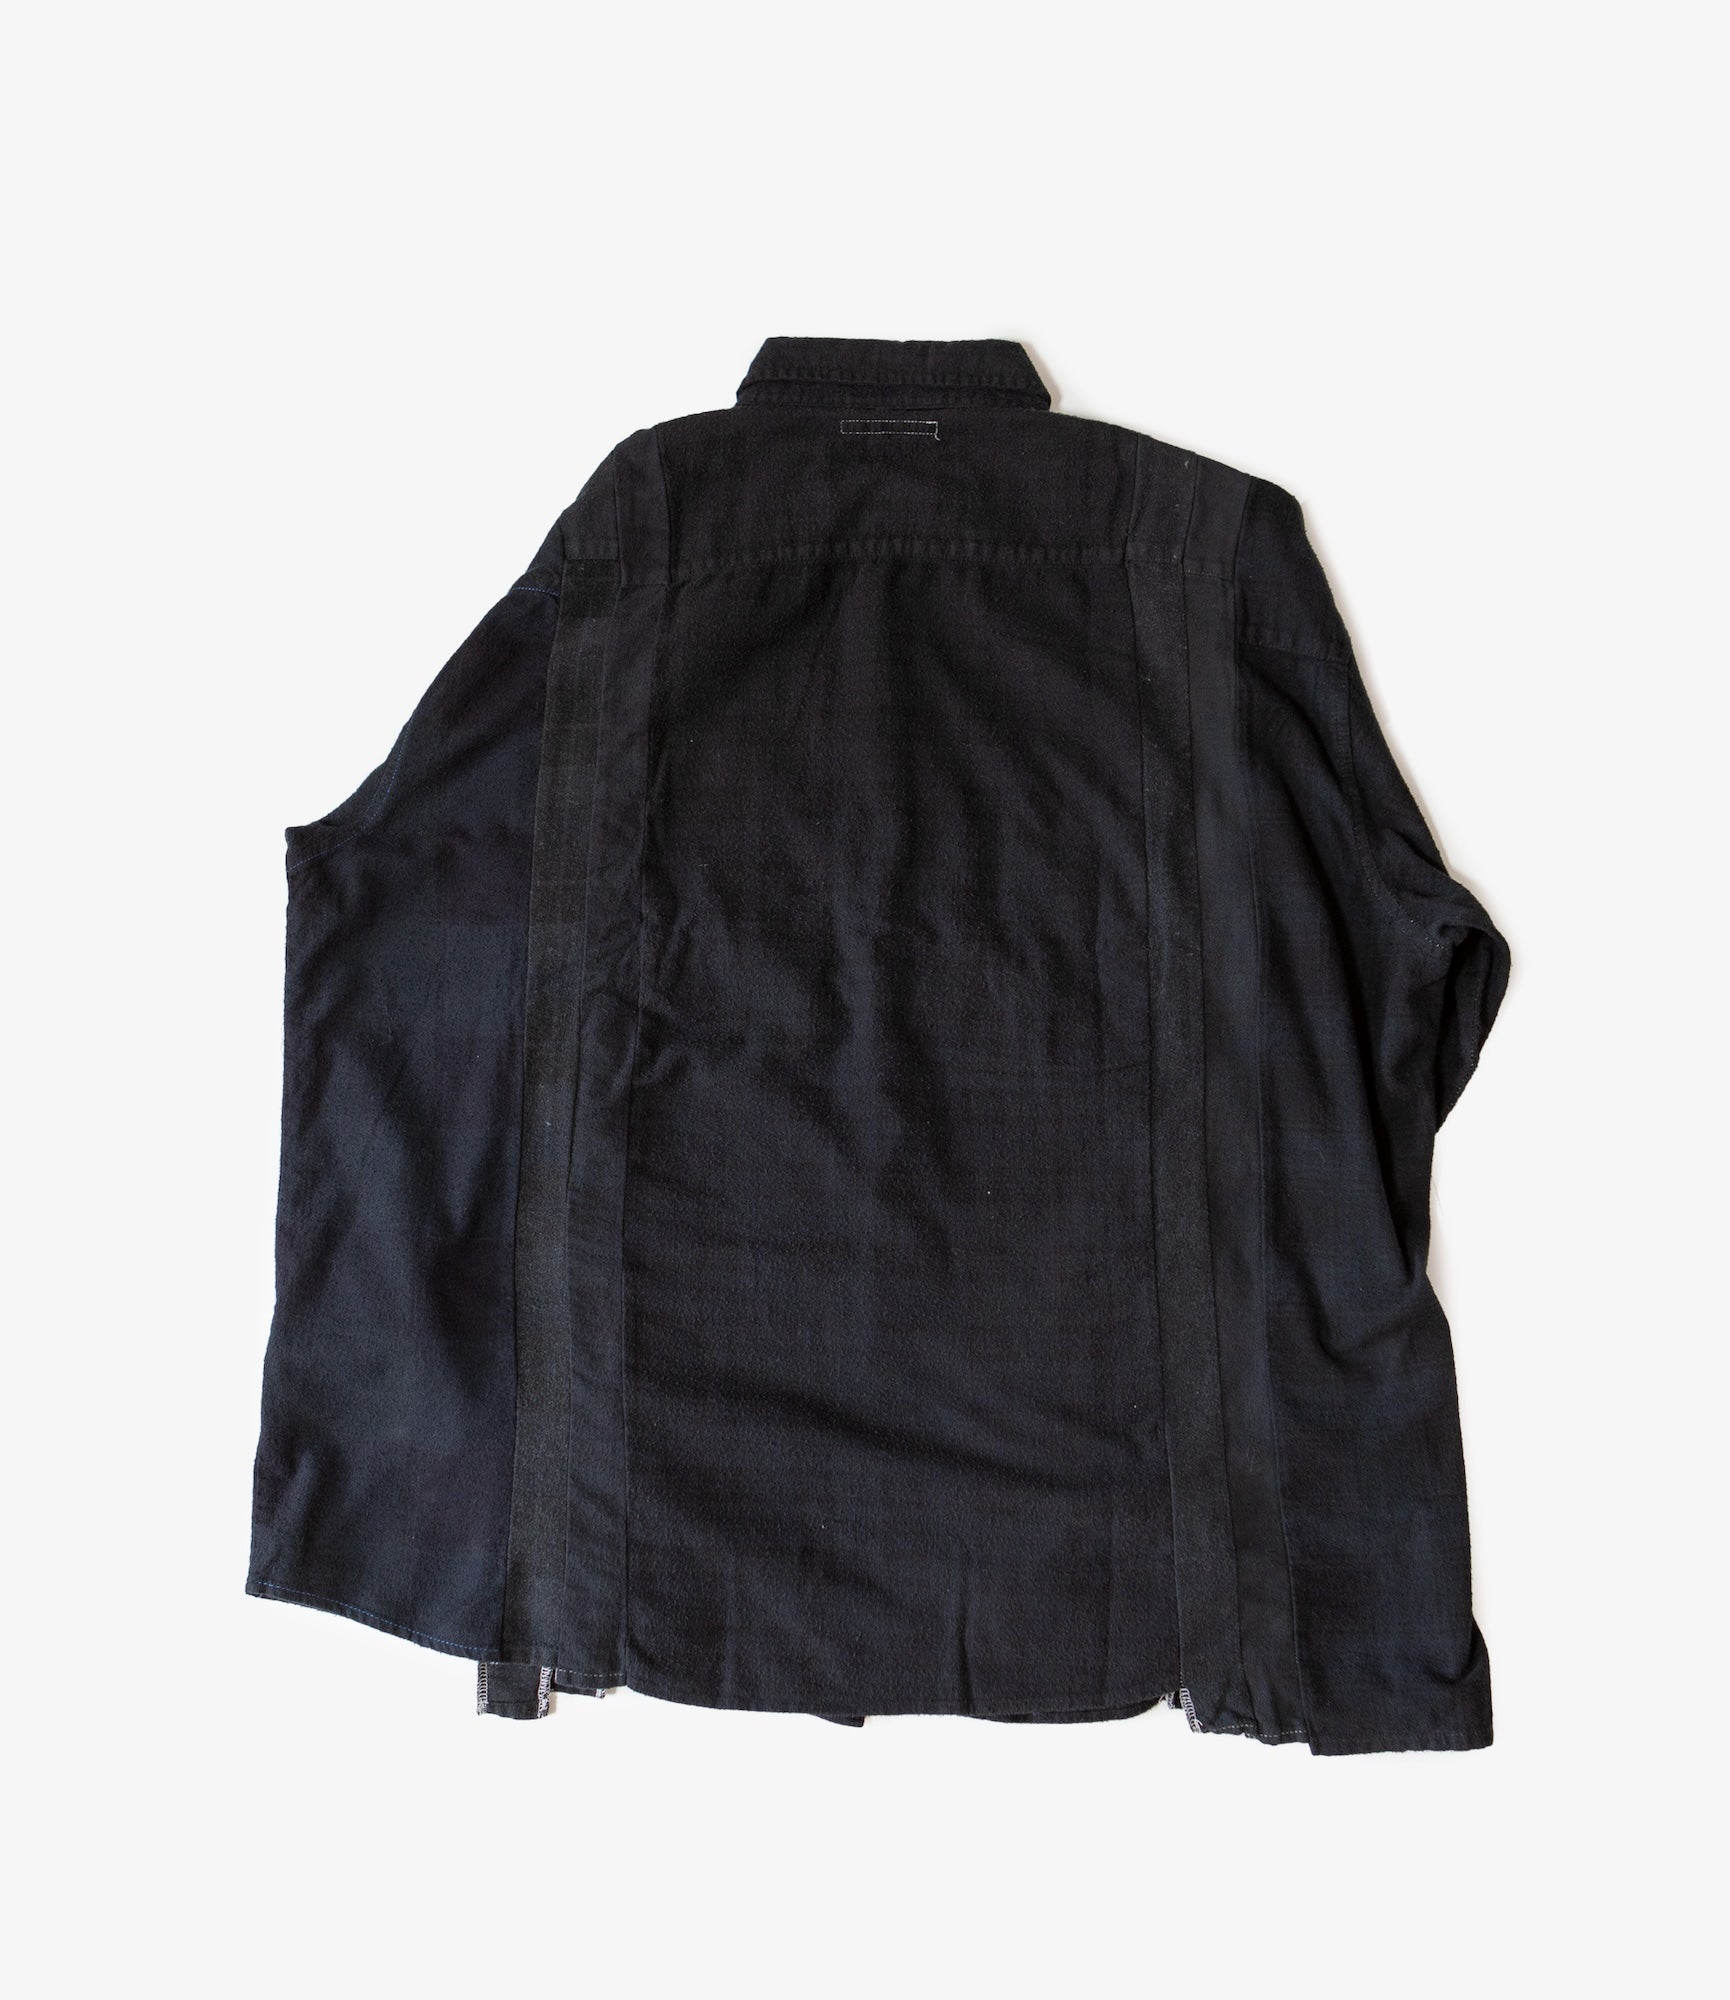 Rebuild by Needles Flannel Shirt - 7 Cuts Wide Shirt / Over Dye - Black